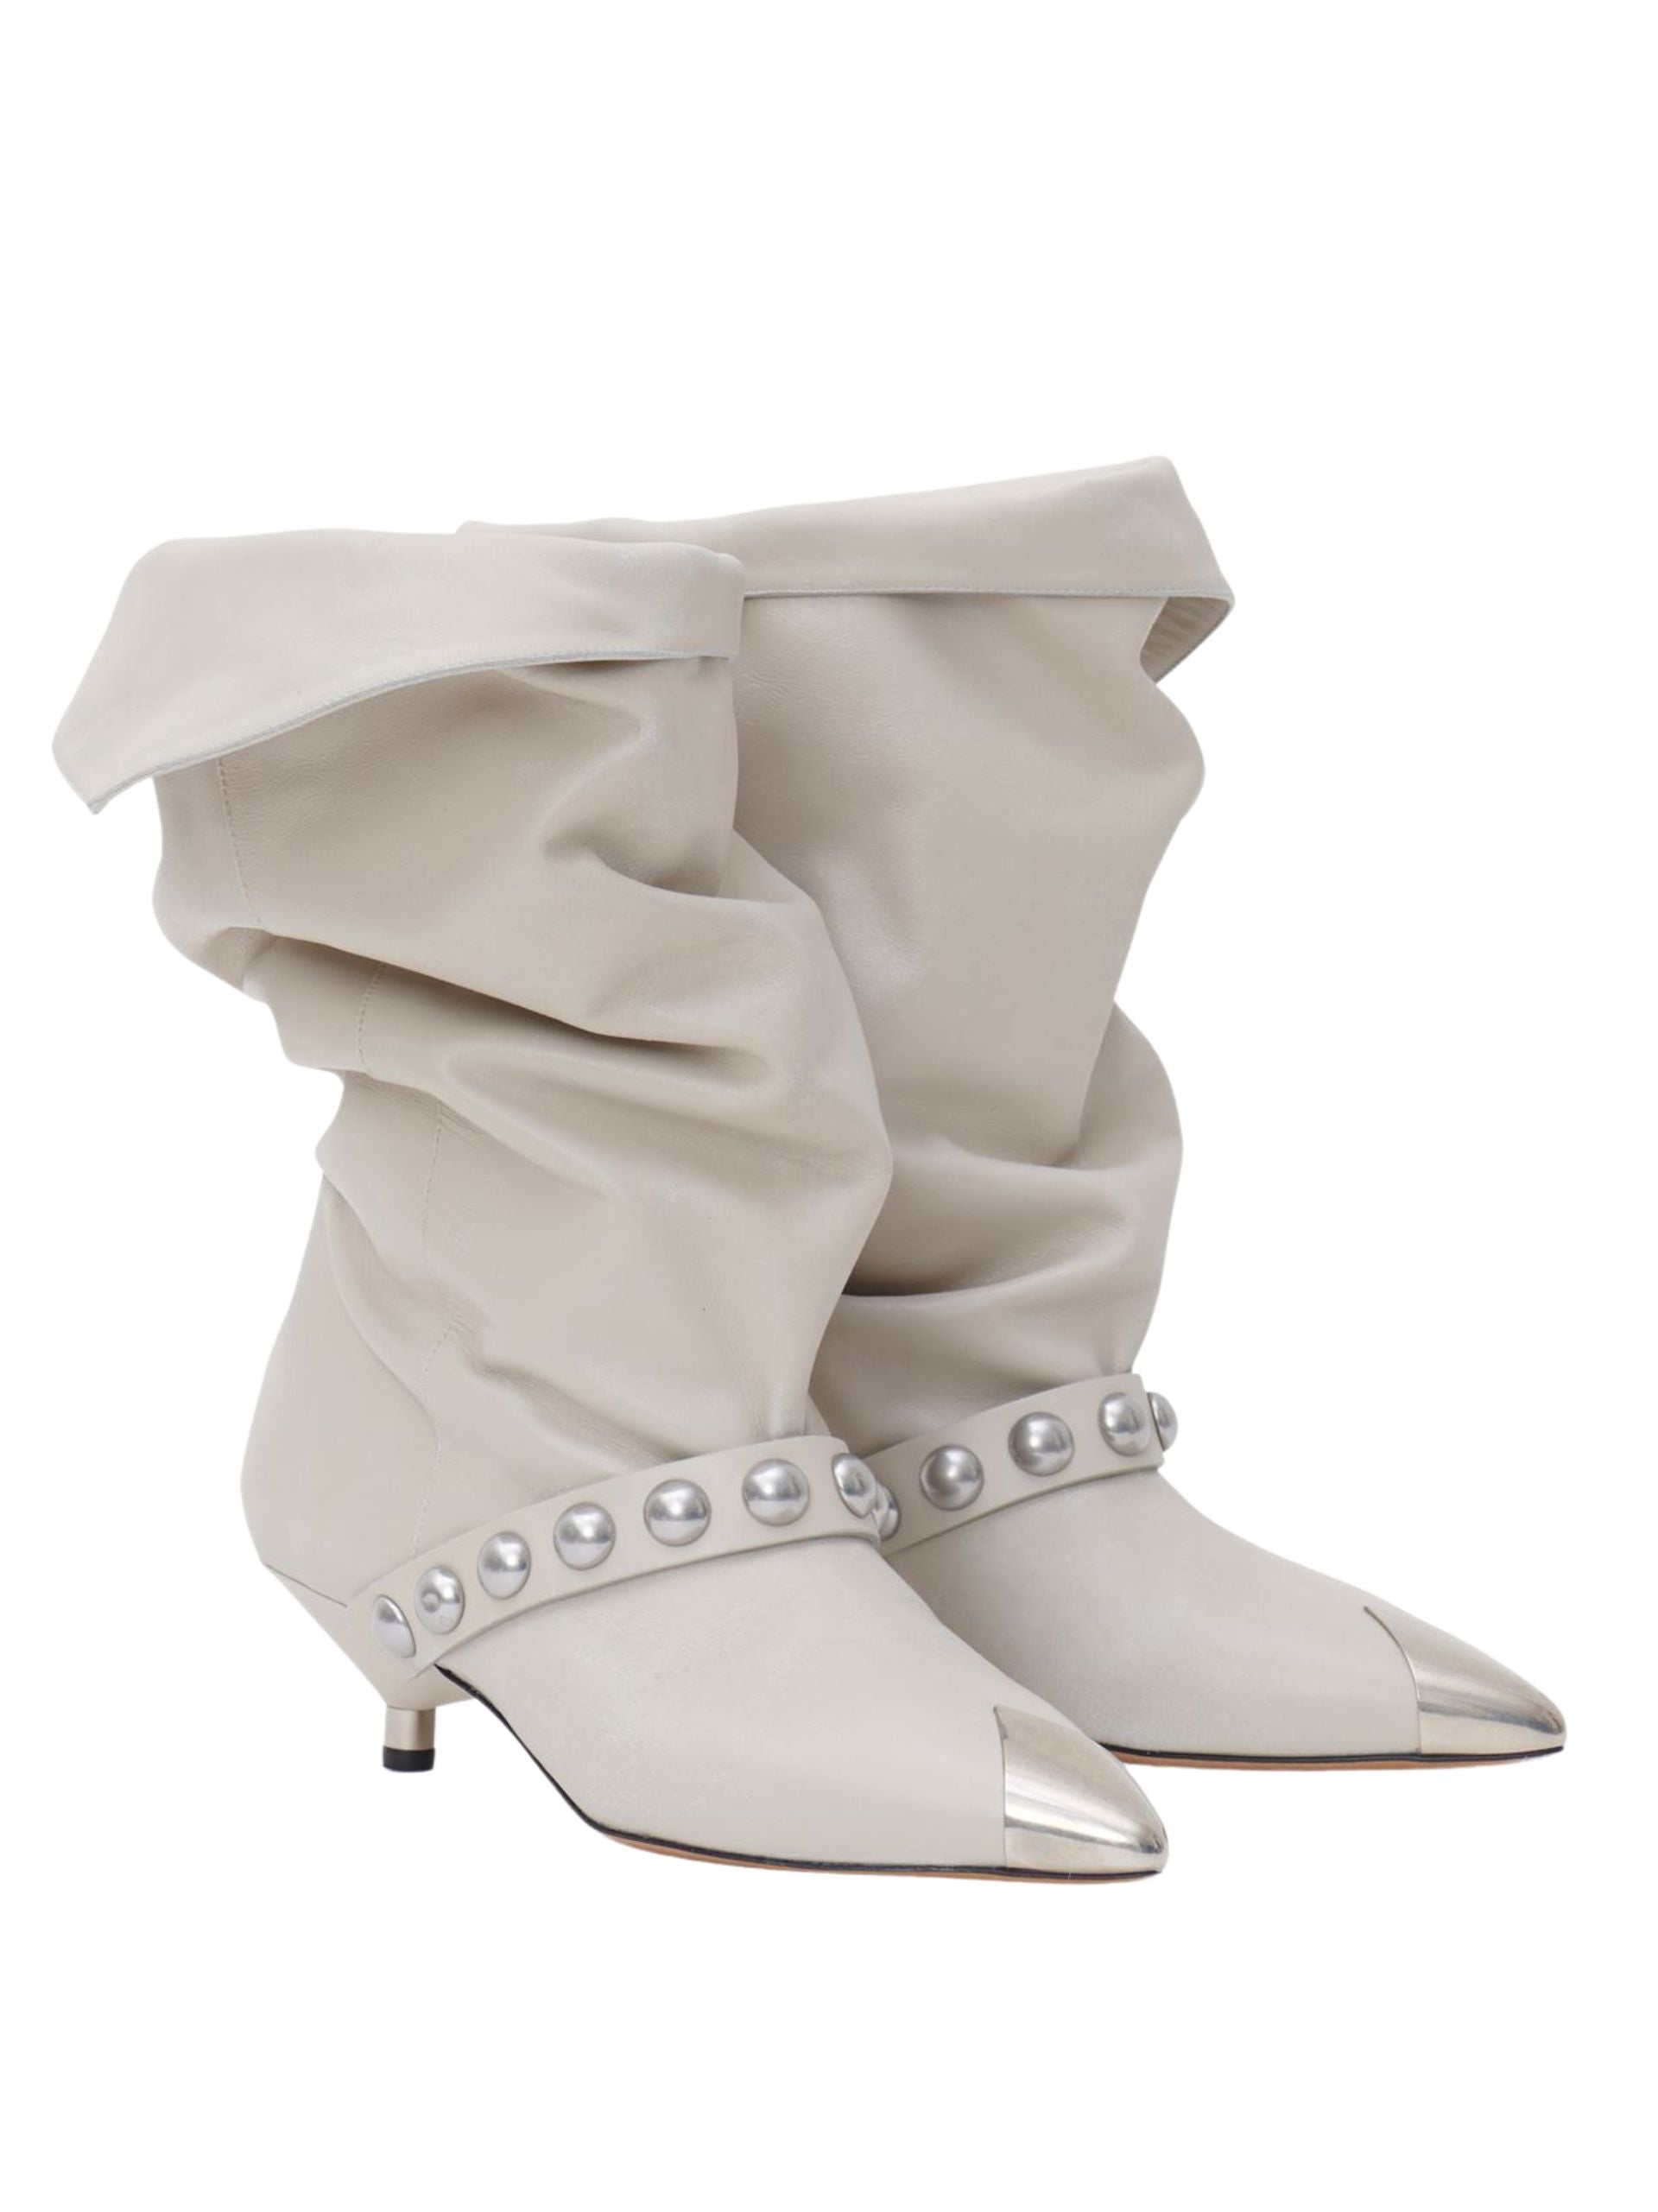 ISABEL MARANT Donatee Leather Ankle Boots in White